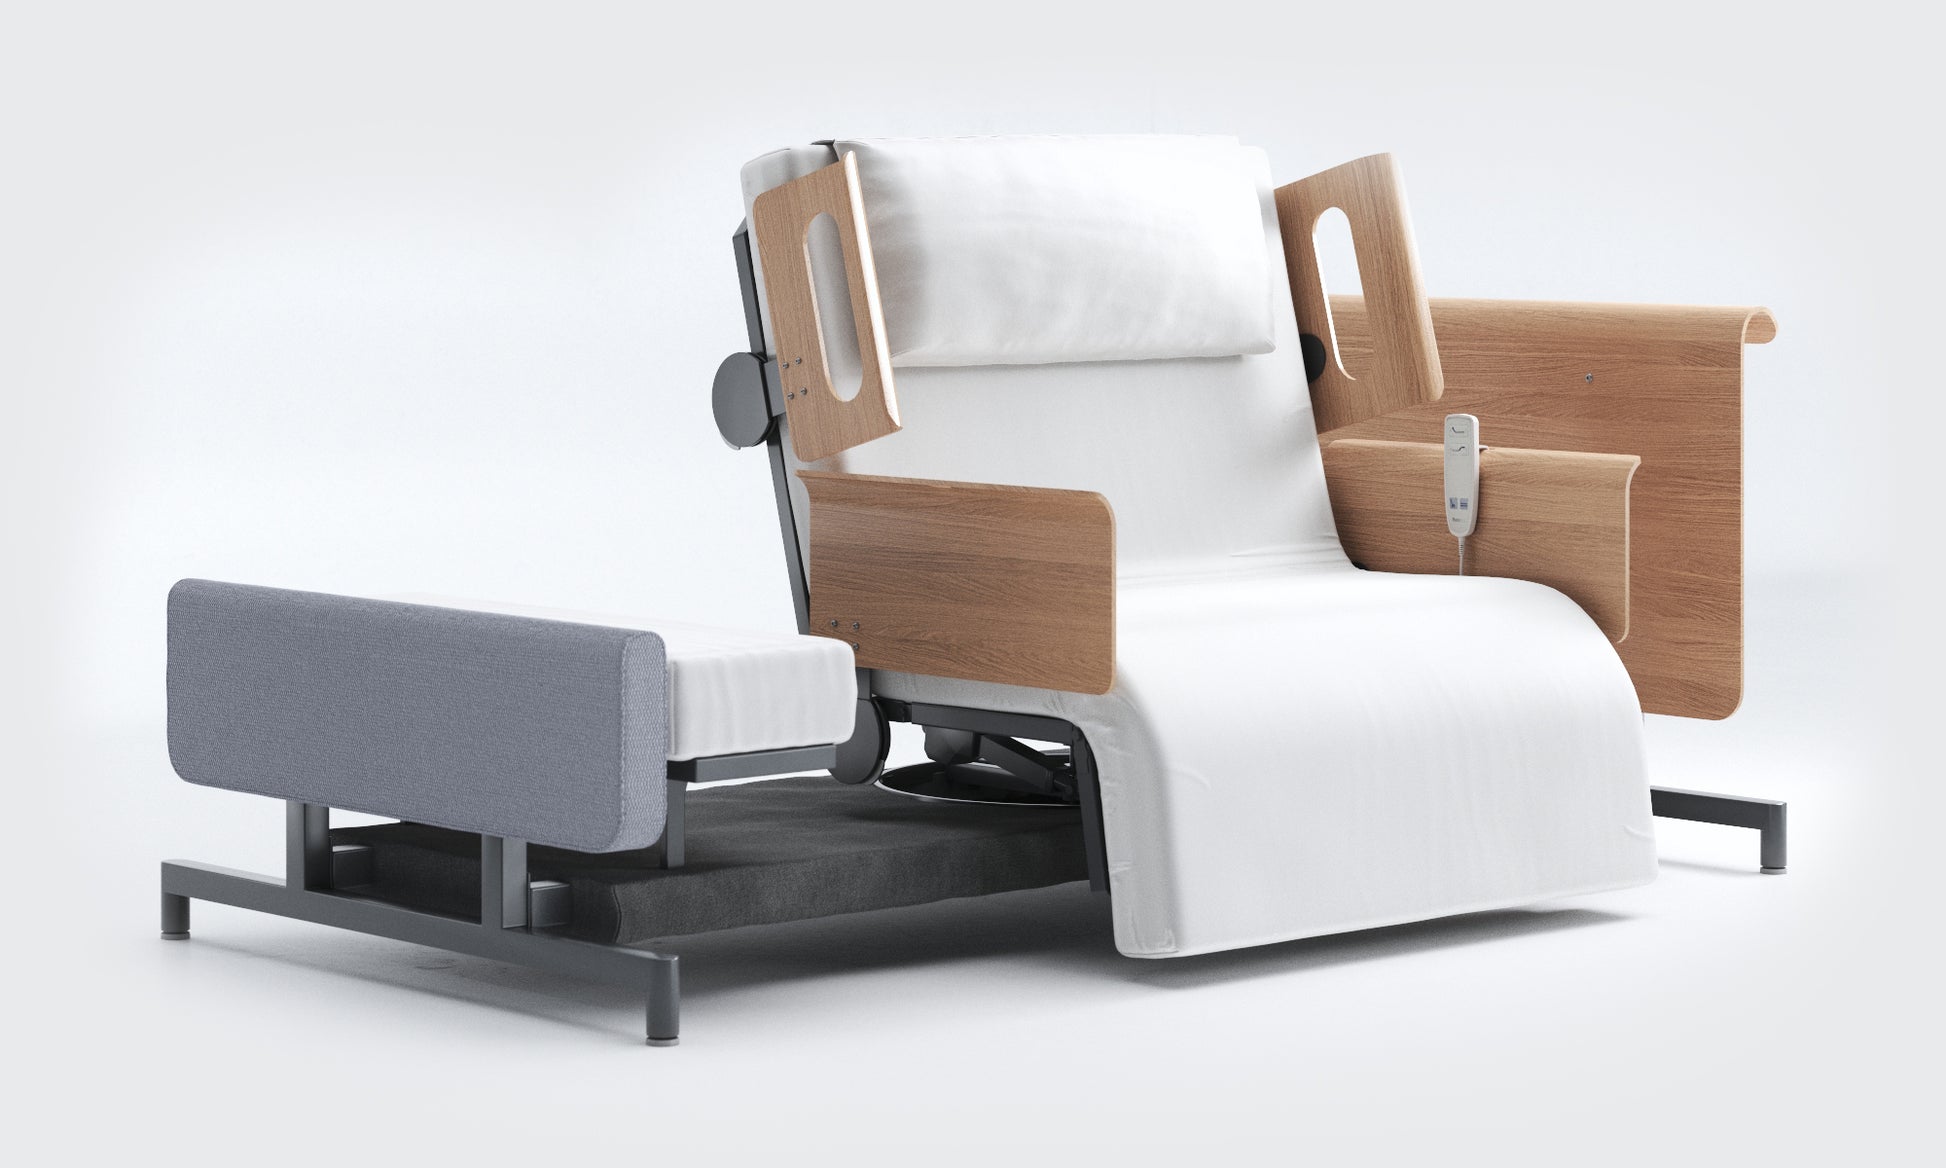 Wired RotoBed Home Rotating Chair Bed With Arms and Head in Stone